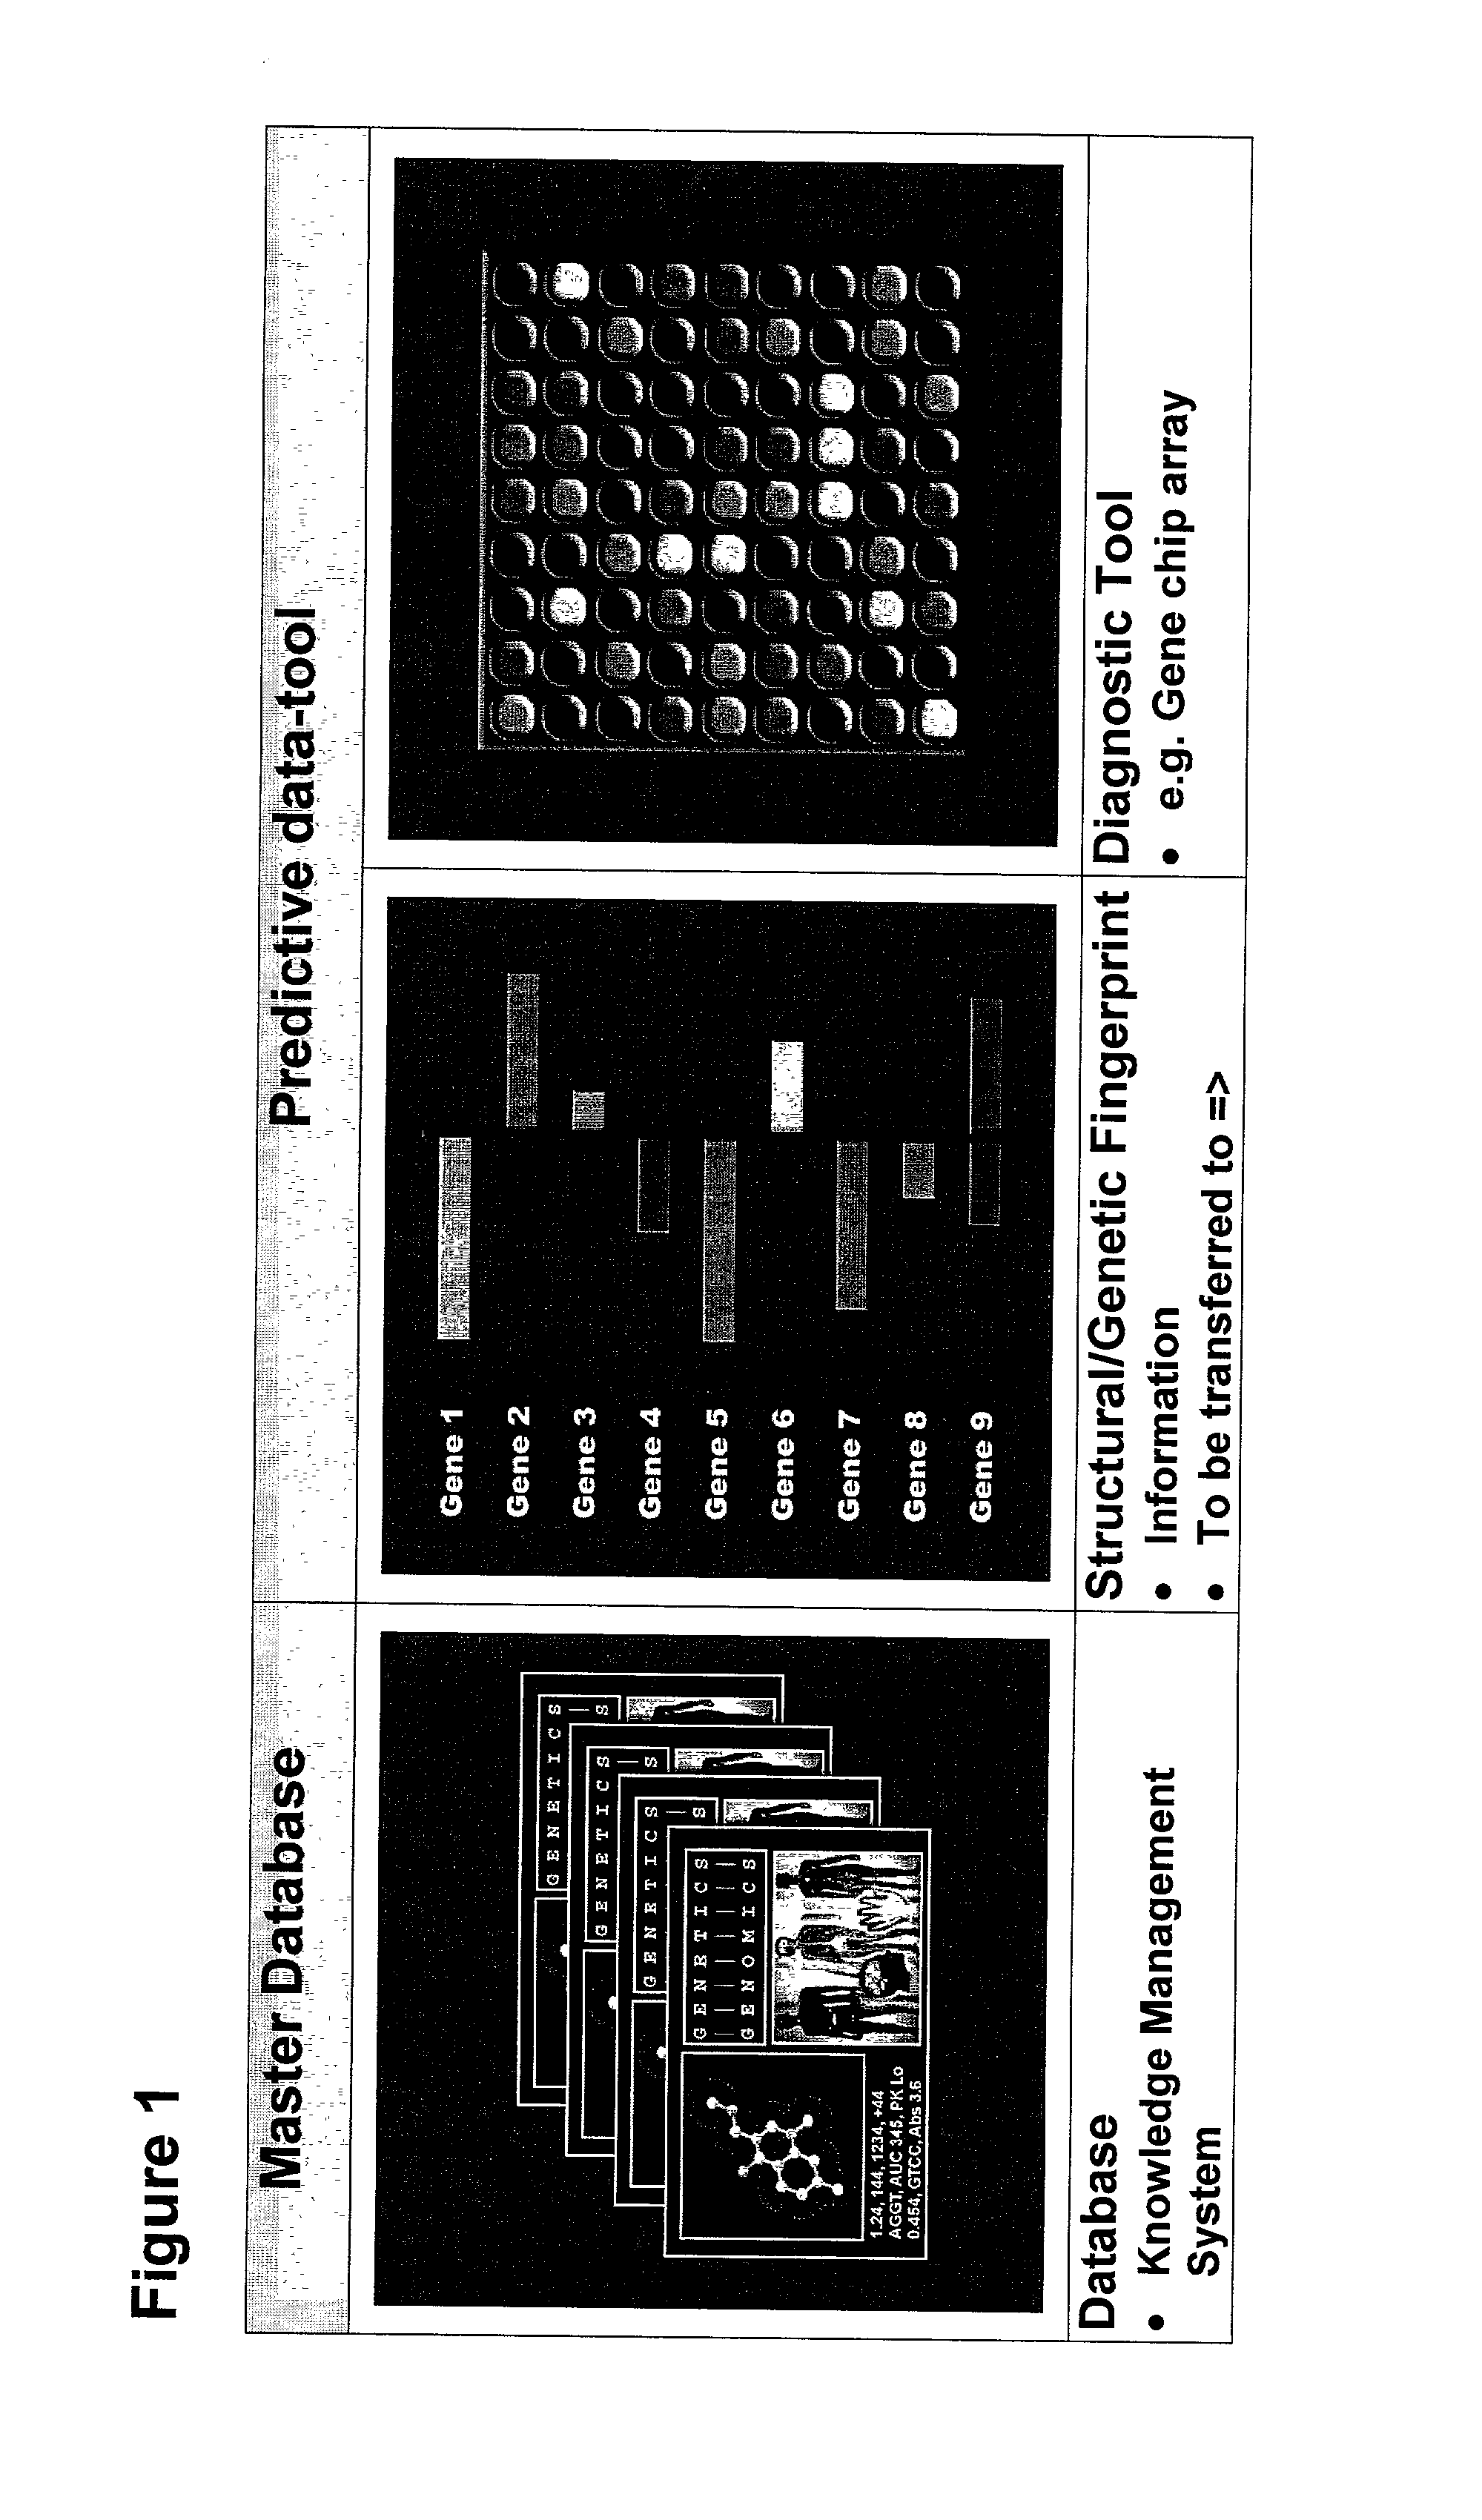 Method and system for registration, identifying and processing of drug specific data